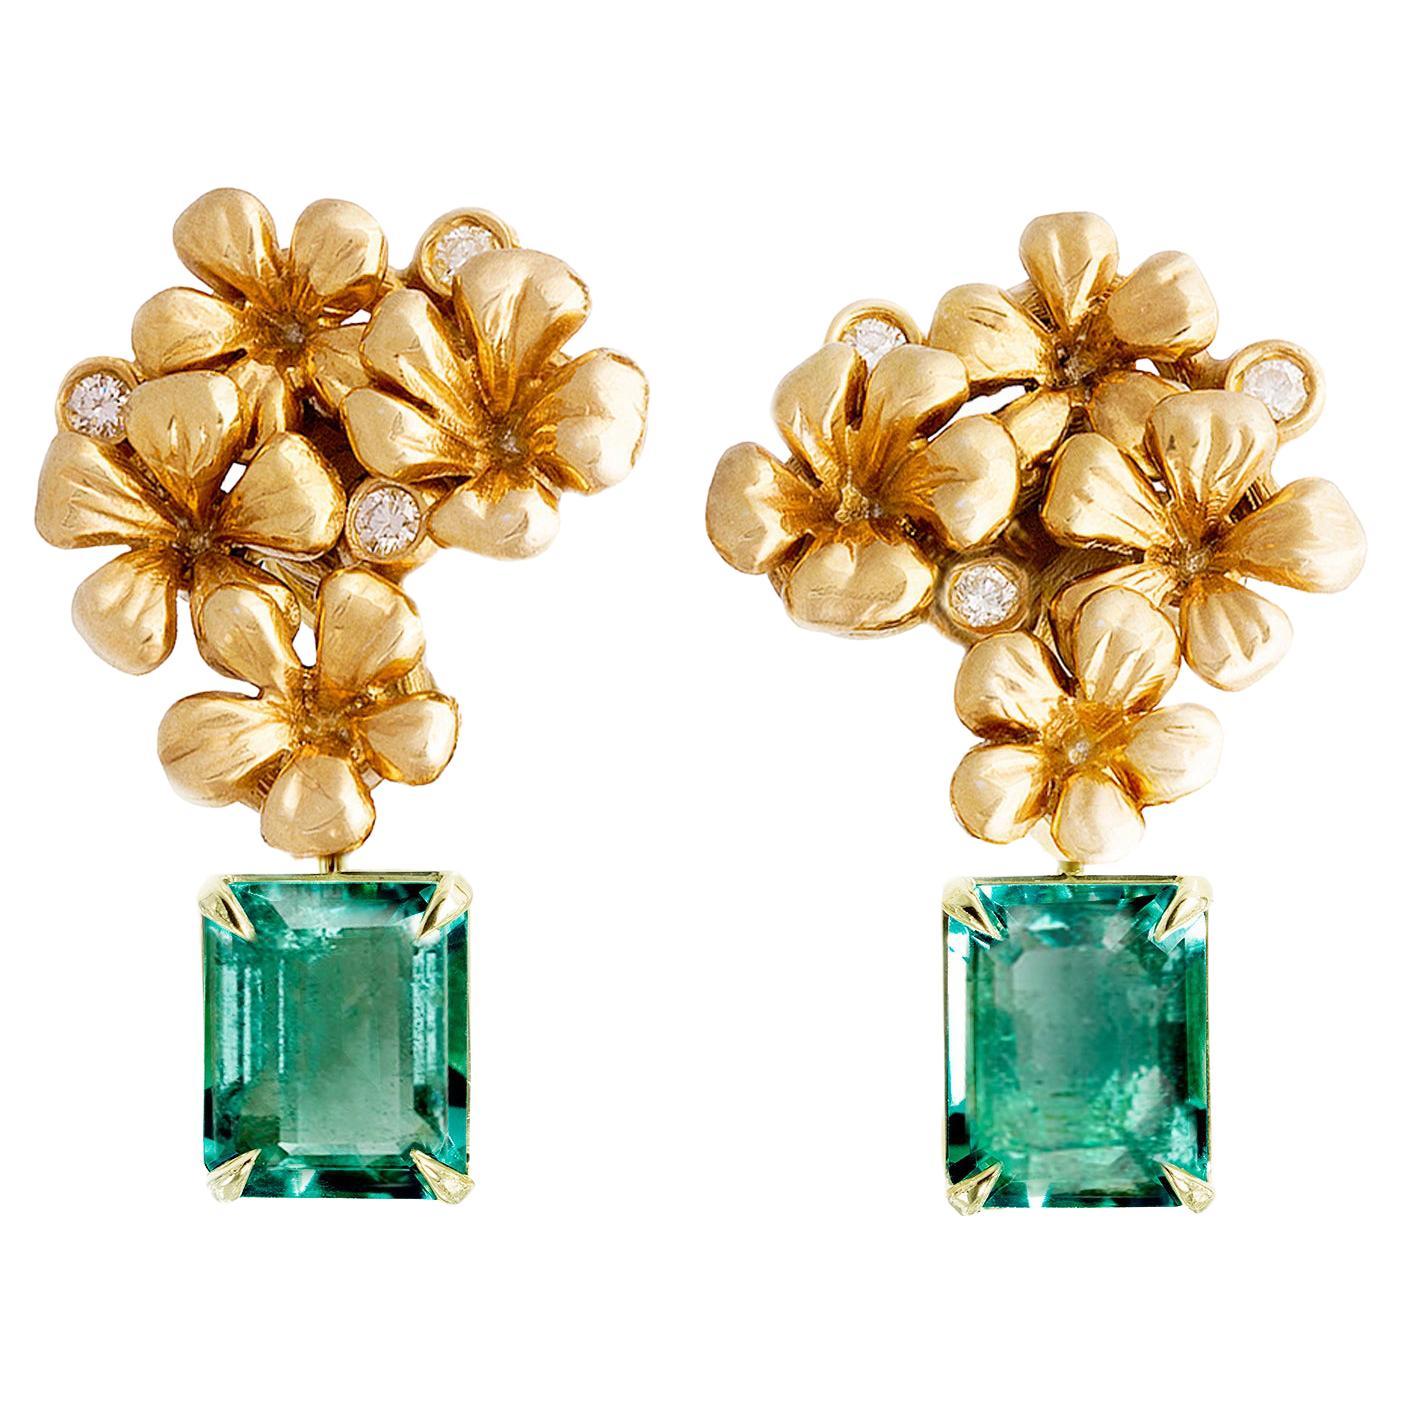 Modern Style Clip-On Earrings in 18 Karat Yellow Gold with Natural Emeralds